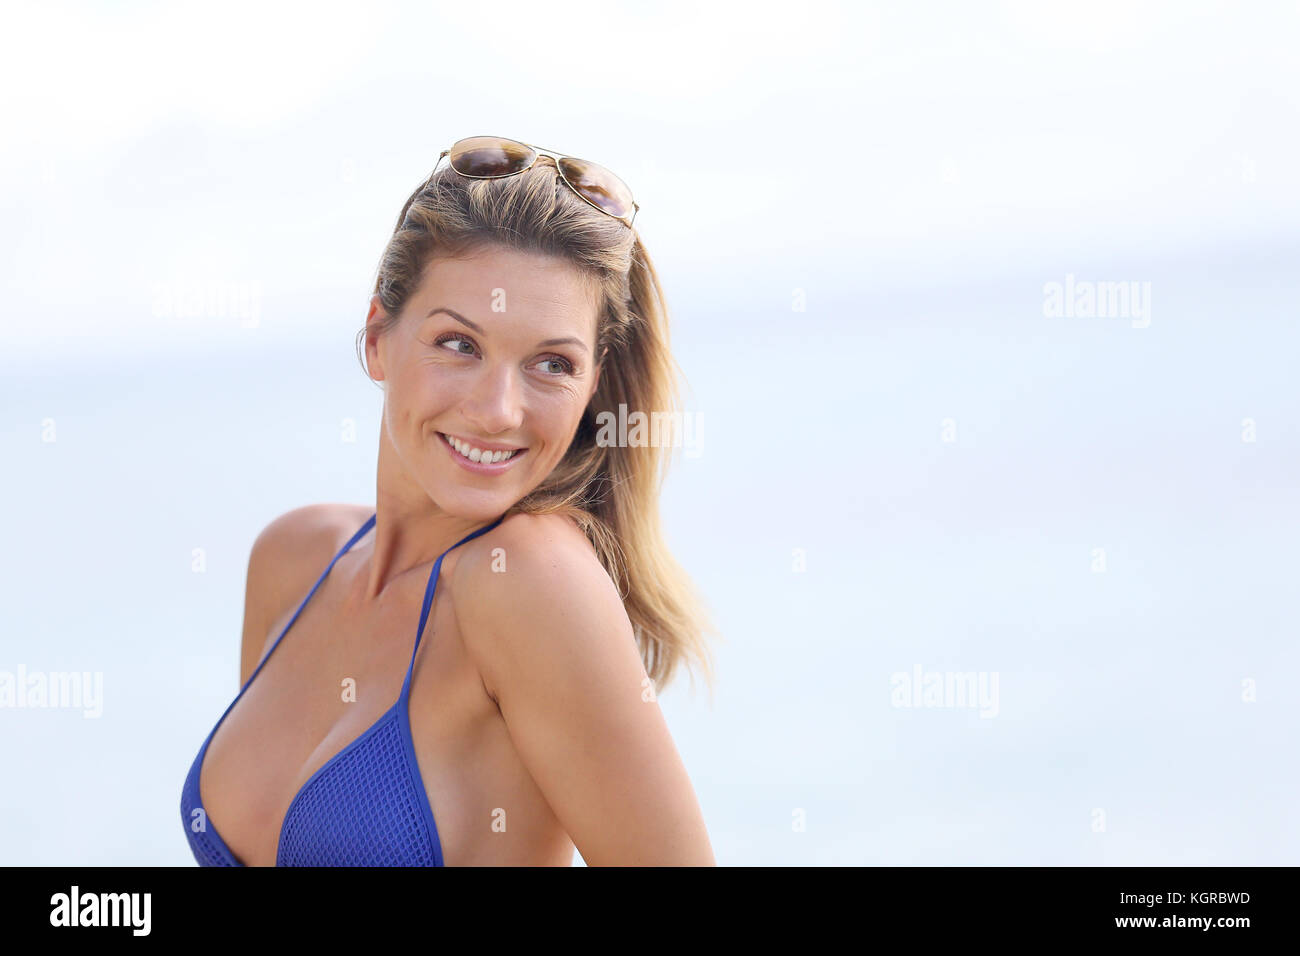 Summer background with fashion woman swimsuit bra and beach accessories top  view. Summer background Stock Photo - Alamy